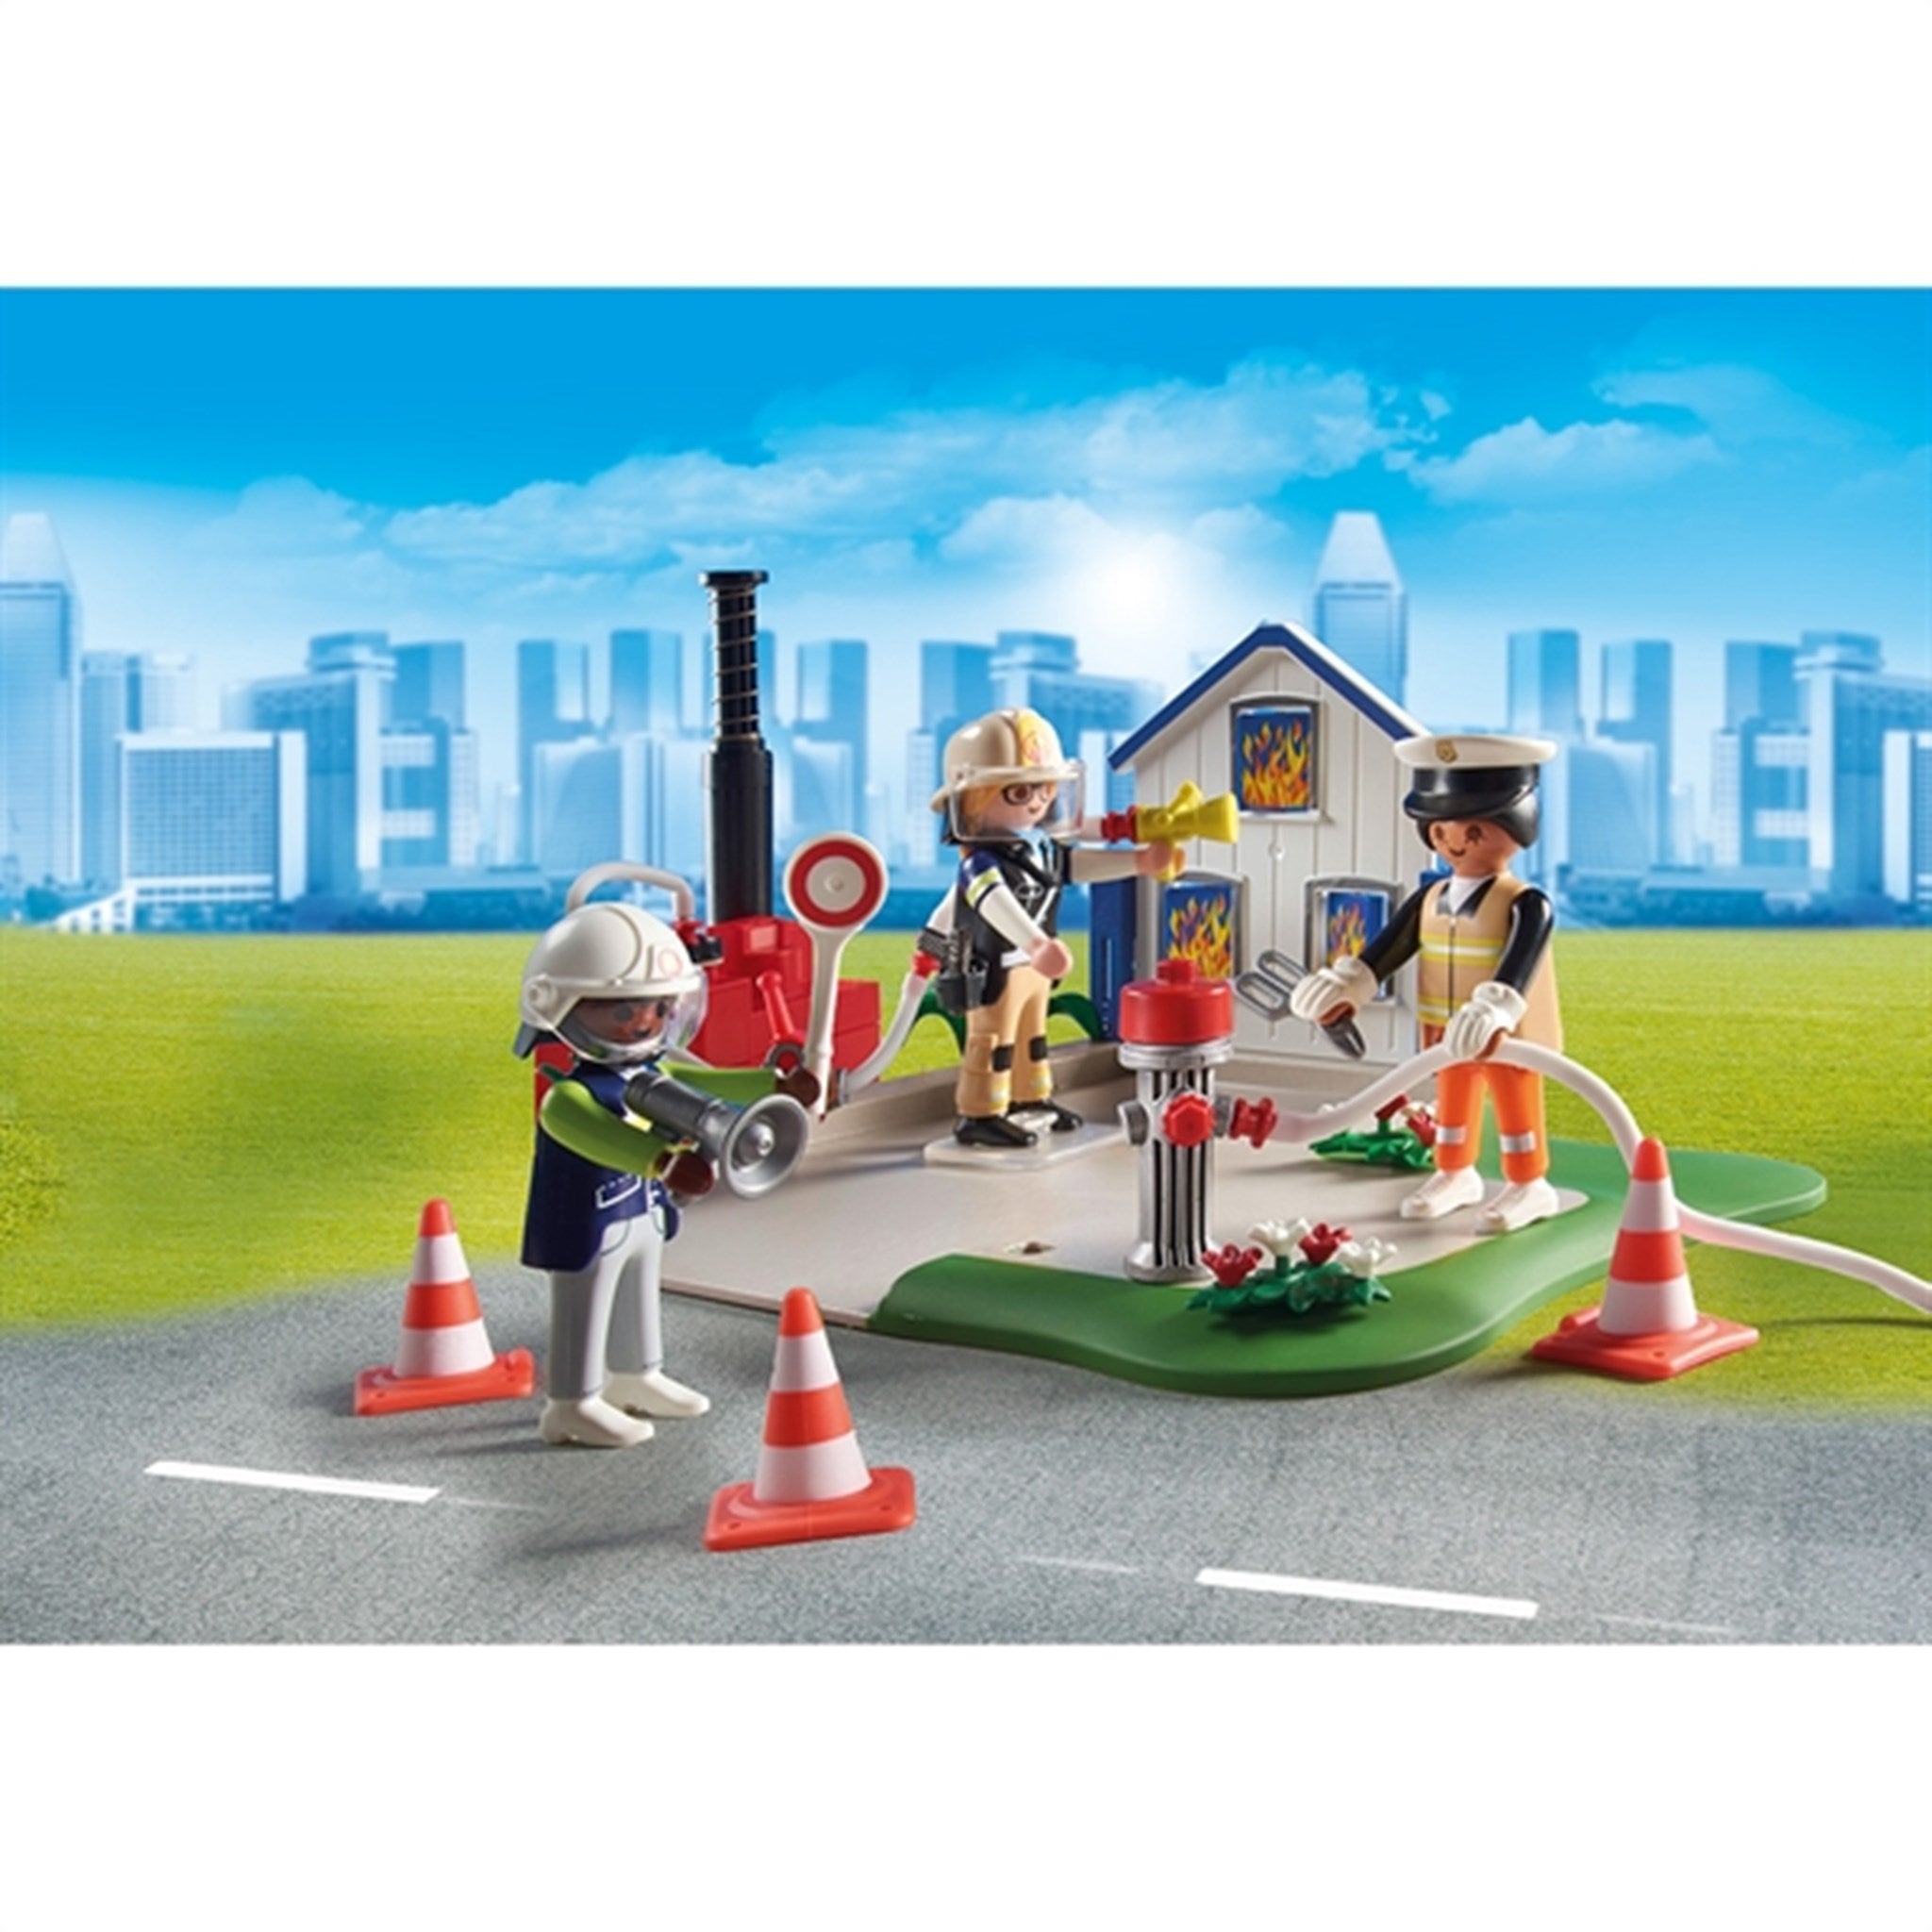 Playmobil® Figures - My Figures: Rescue Mission 3